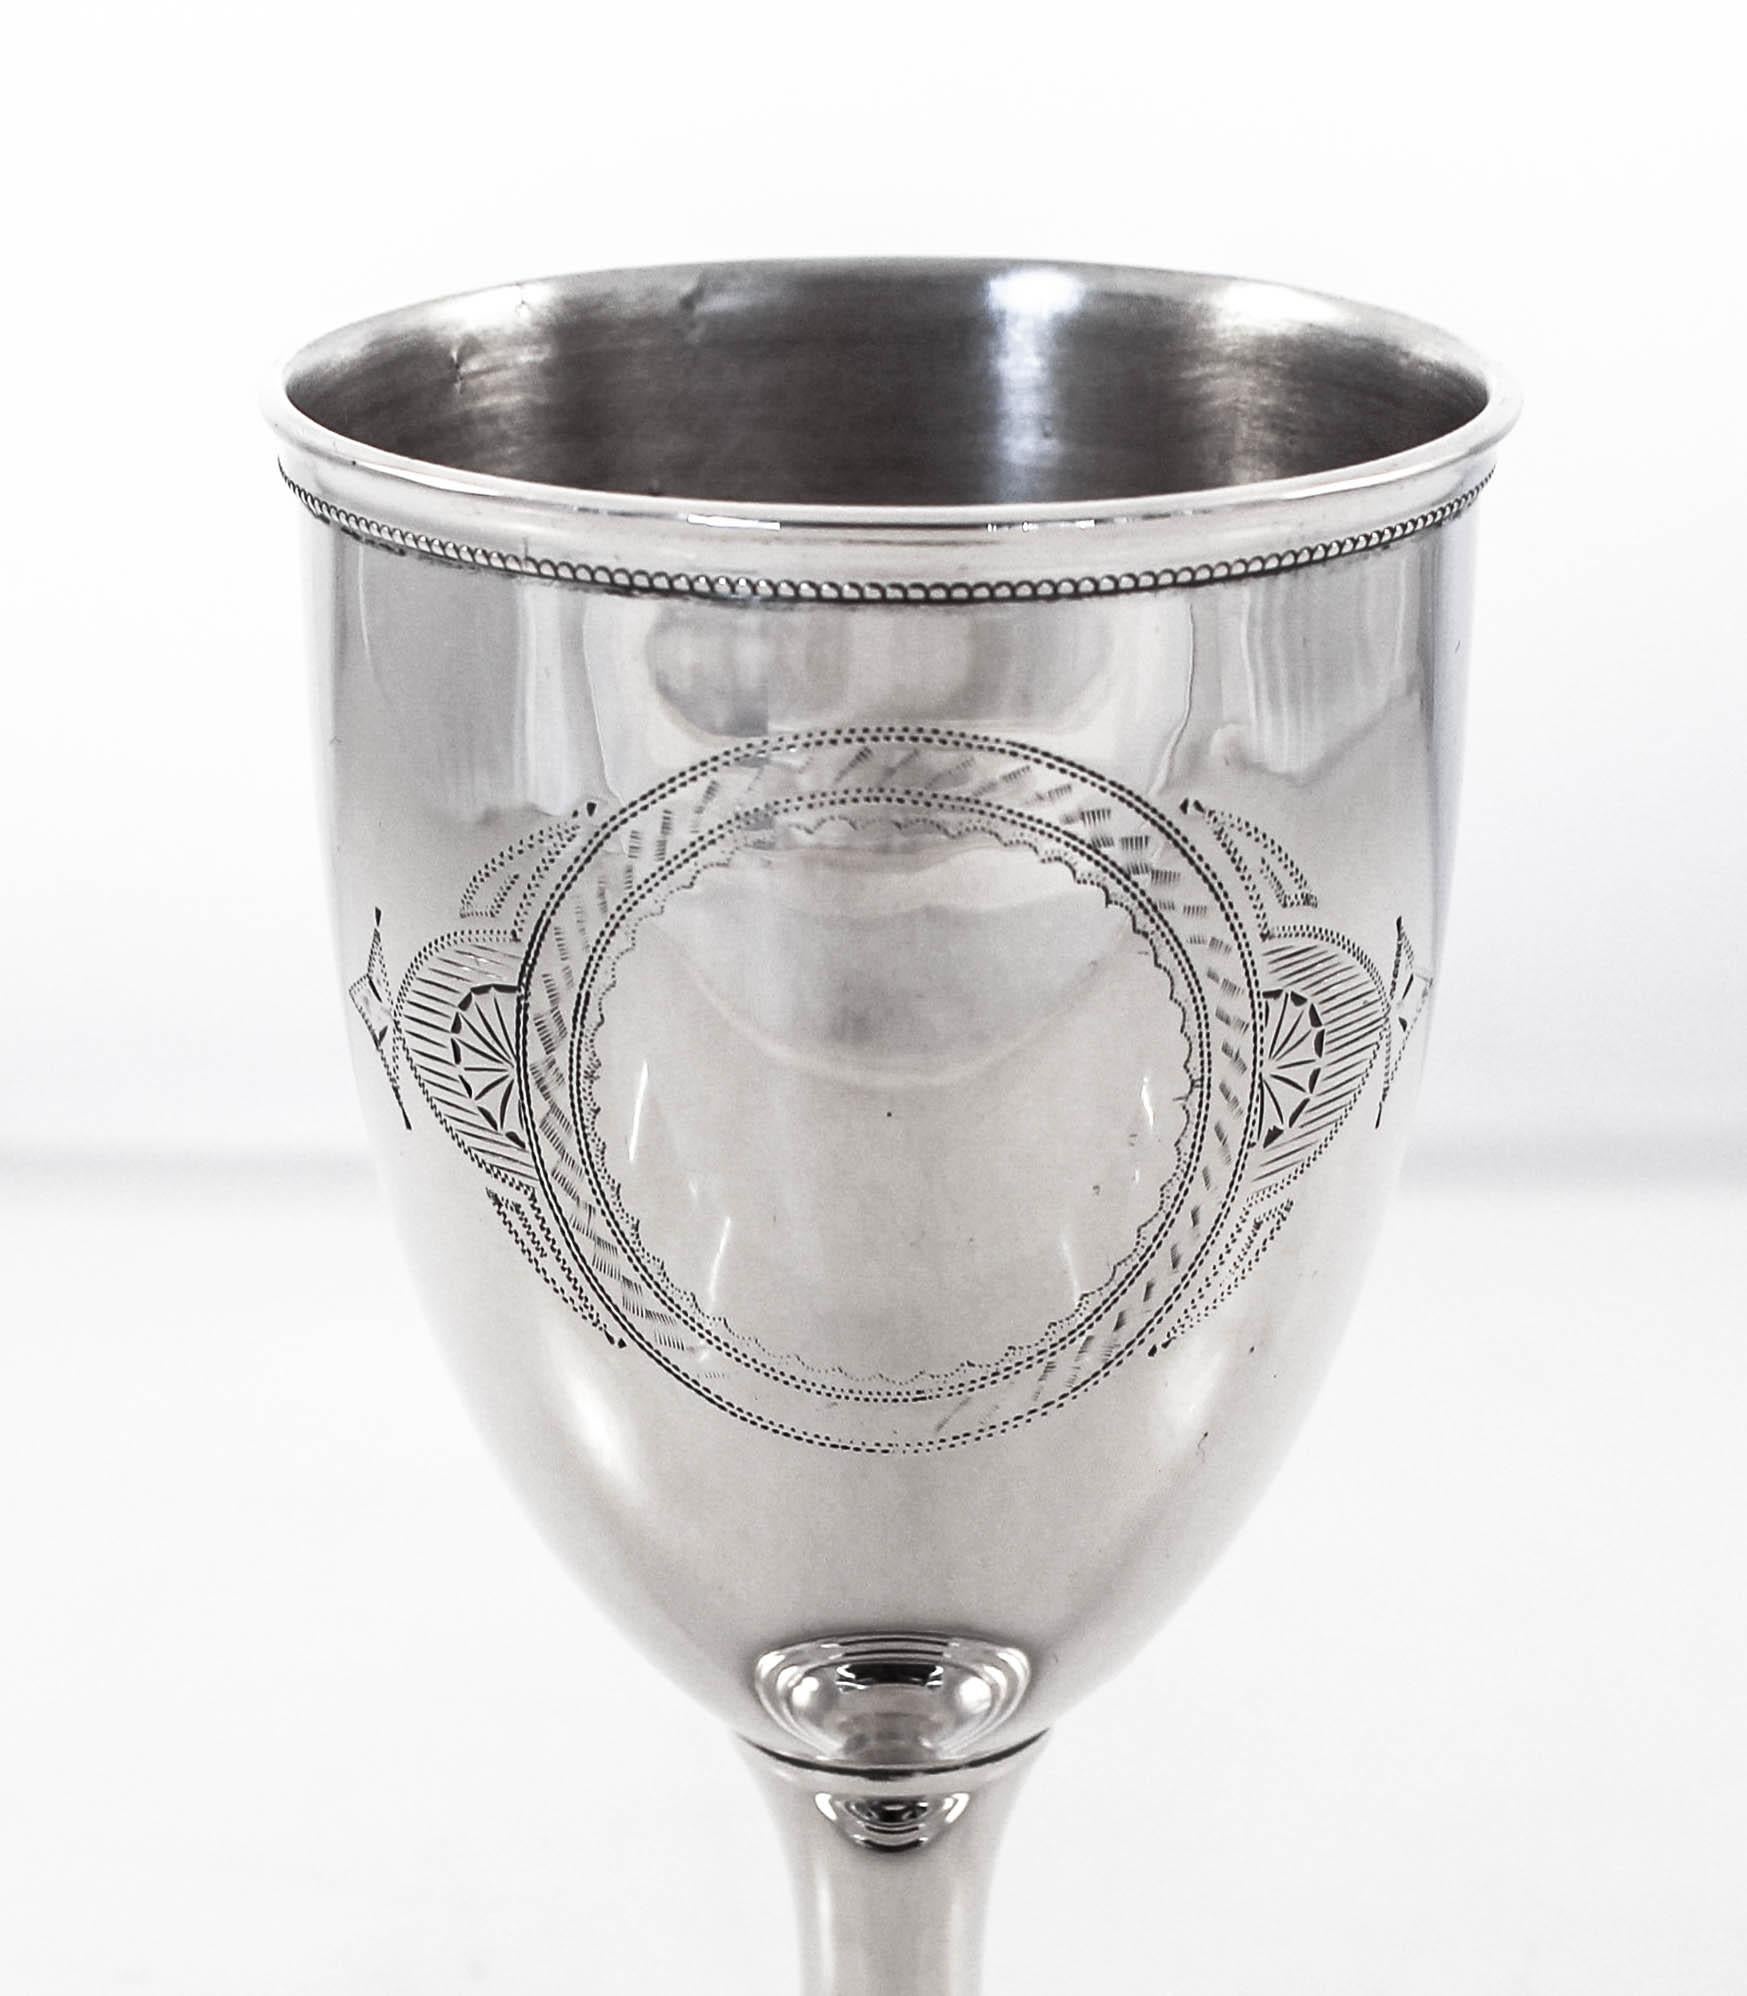 We are delighted to offer this sterling silver goblet from the late 19th century. Understated and elegant it is a rare treasure. It has a pretty motif around the base and rim and has a cartouche in the center for you to personalize with a monogram.